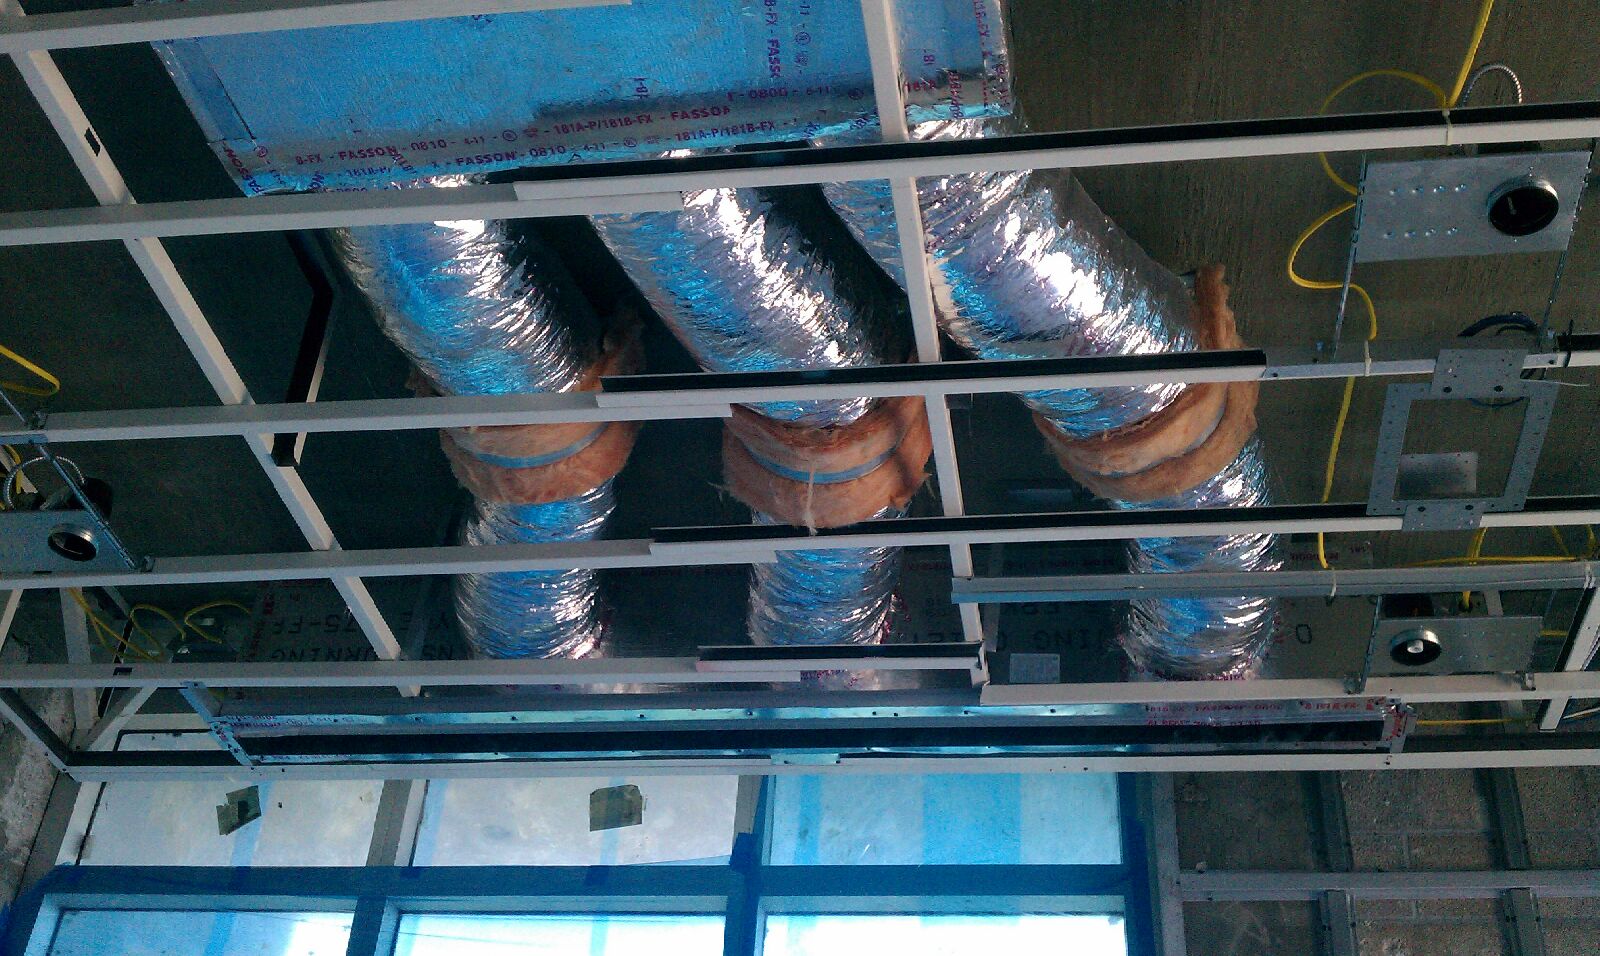 Air Mike Diffusers and Ductwork